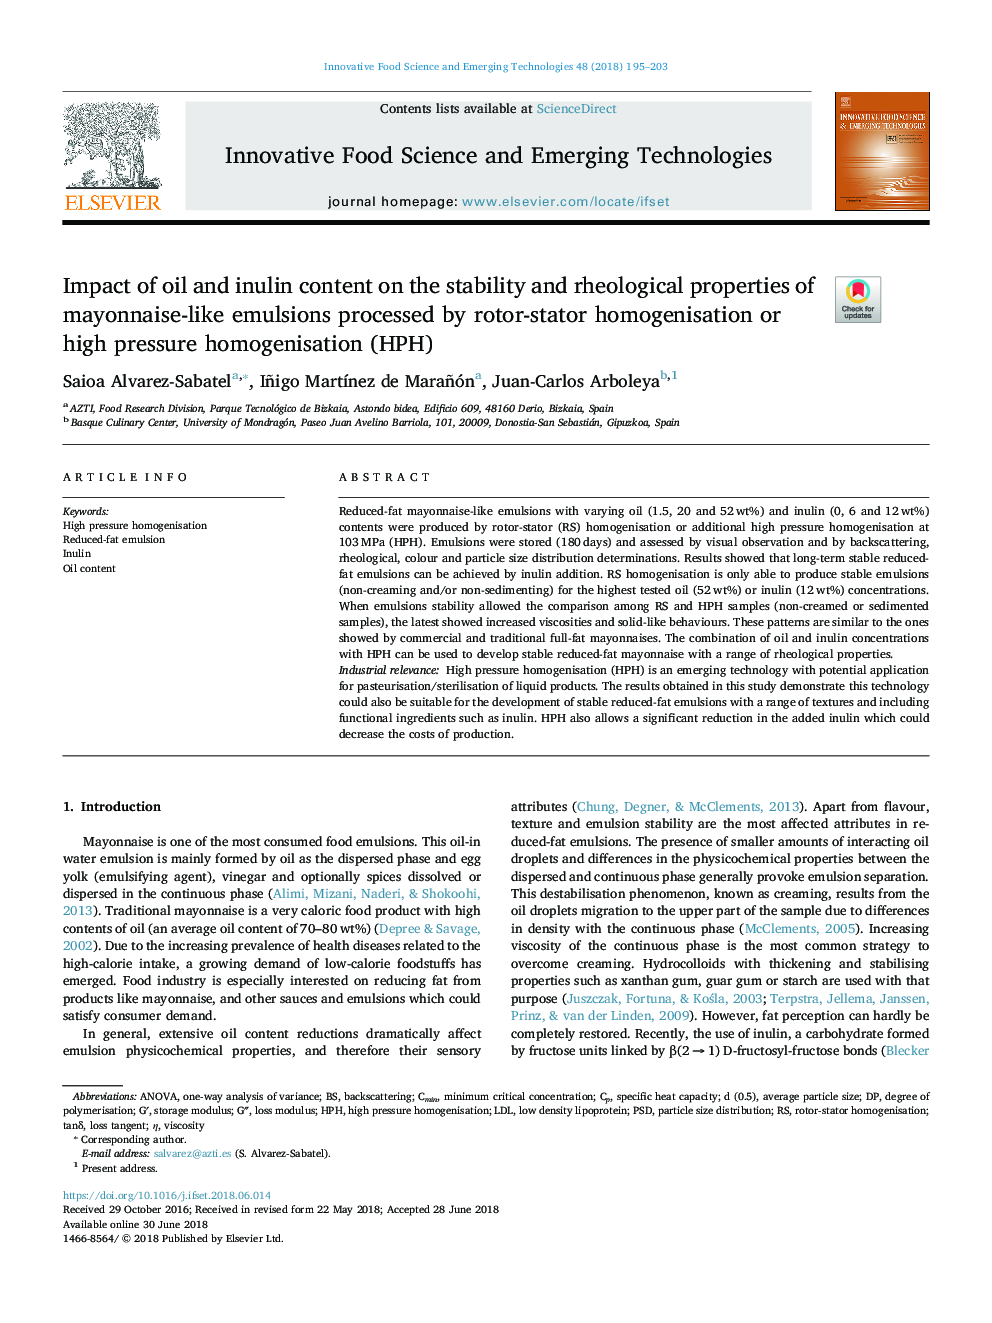 Impact of oil and inulin content on the stability and rheological properties of mayonnaise-like emulsions processed by rotor-stator homogenisation or high pressure homogenisation (HPH)